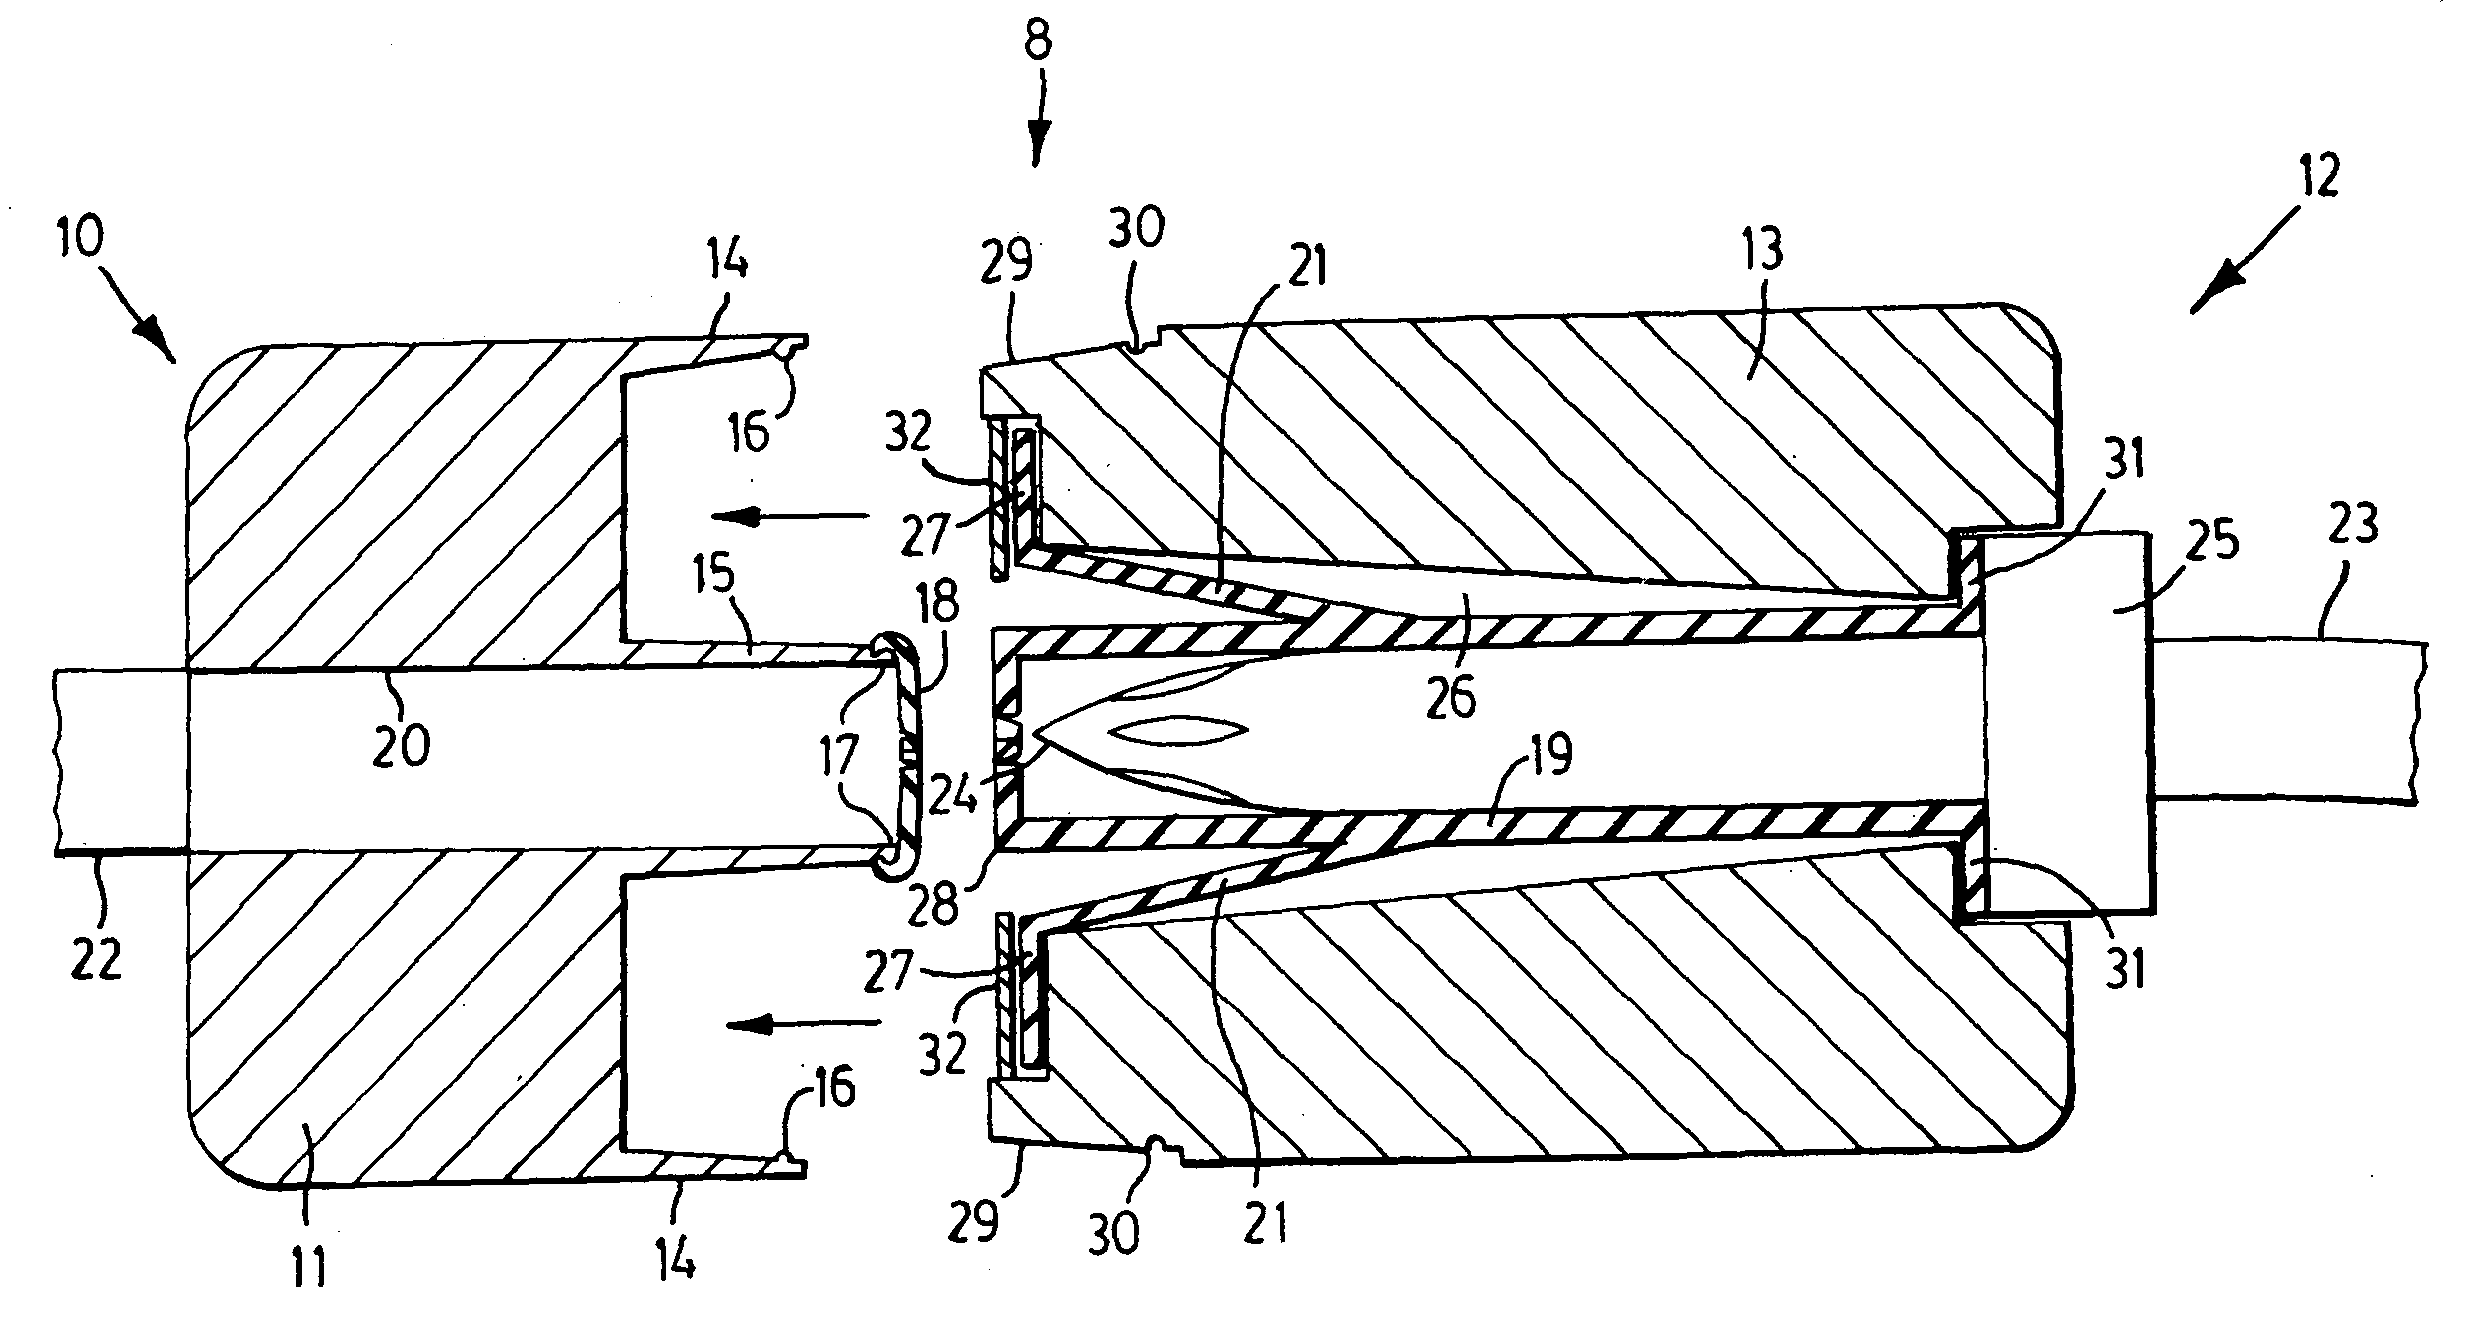 Coupling device for medical lines